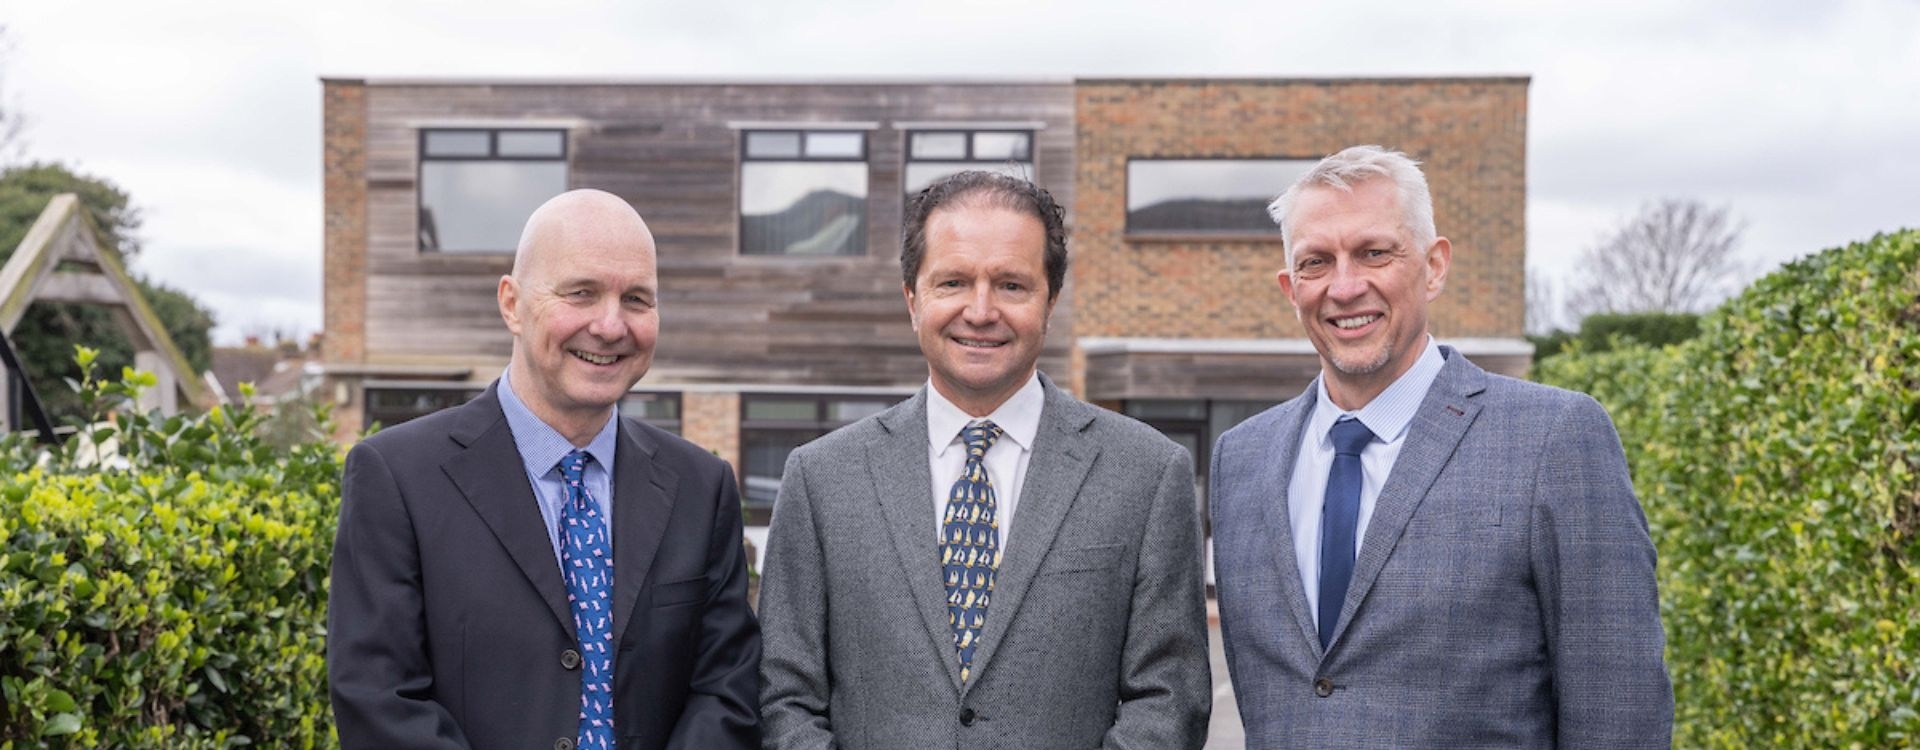 Pilbeam Construction sees bright future following management buy-out